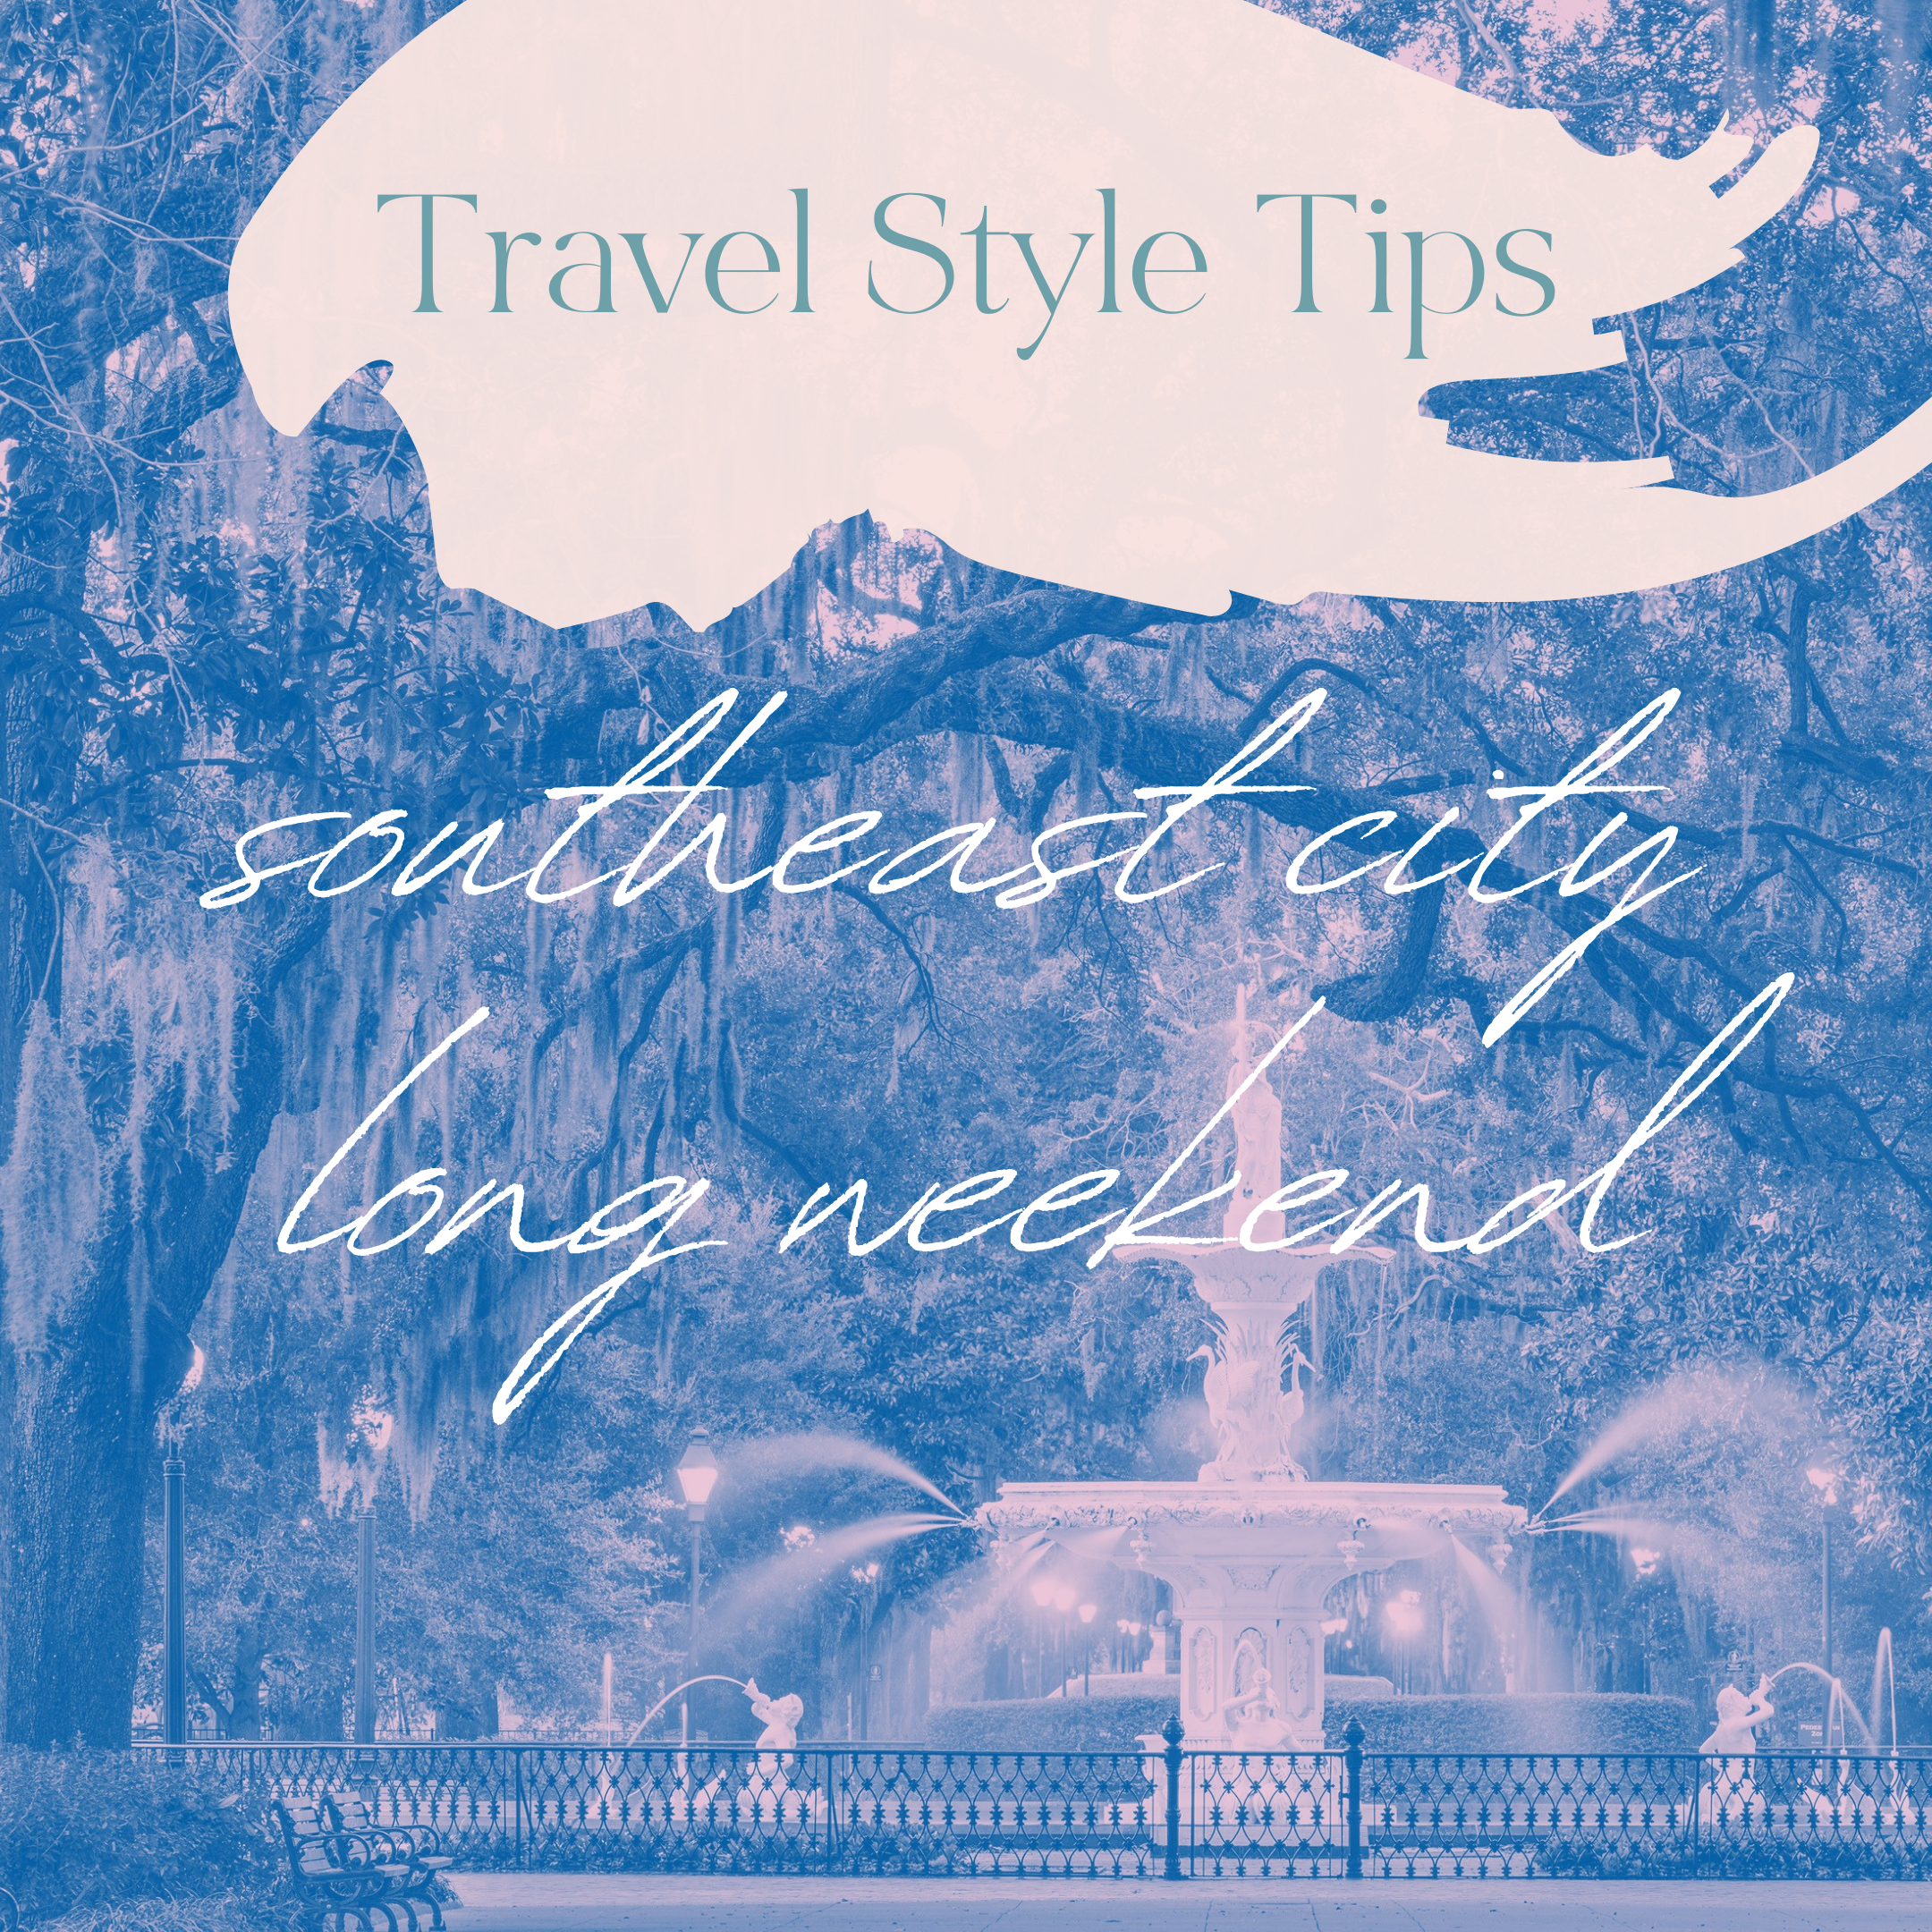 Travel Style Tips: Southeast City Long Weekend